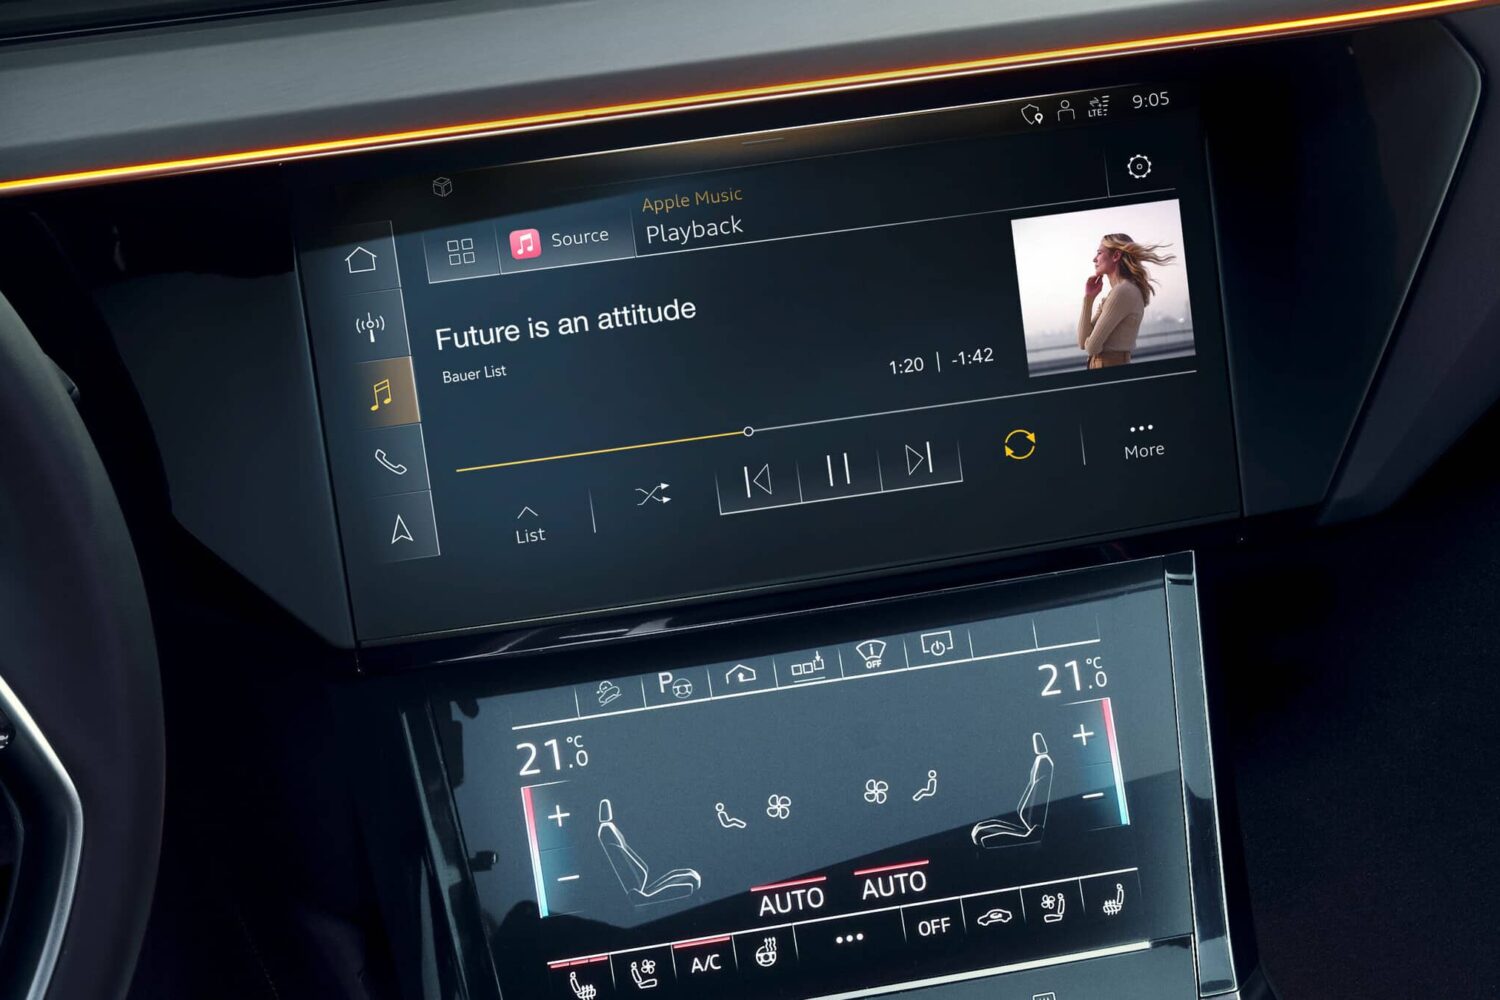 Apple Music's native integration in Audi's 2022 models is showcased in this press photo, with the Now Playing interface displayed on a car's Multi-Media Interface screen